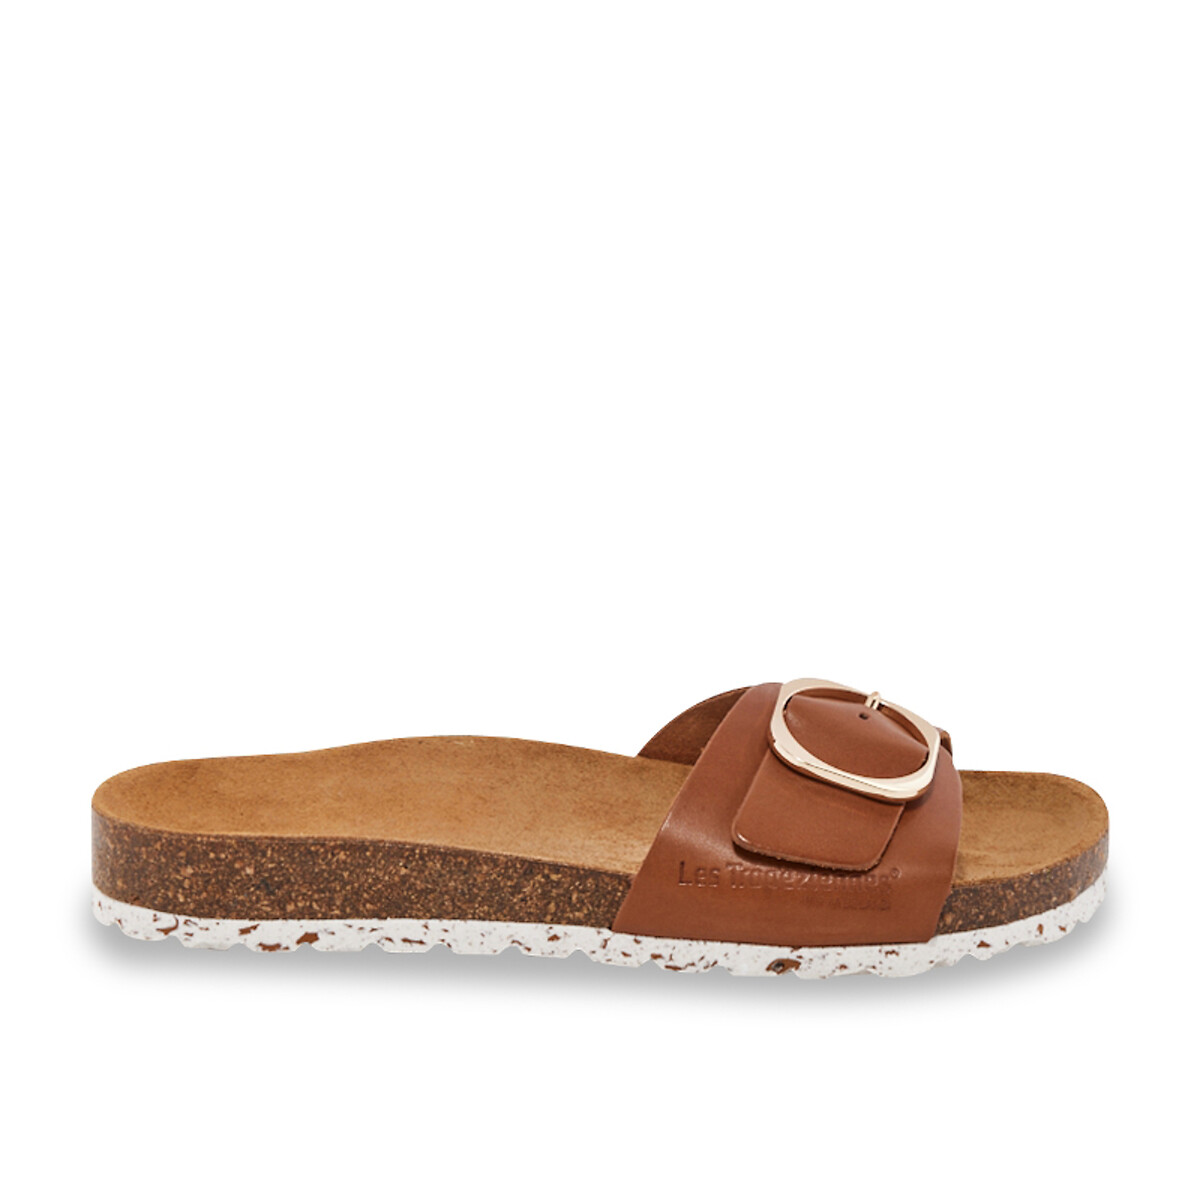 Zullox Leather Mules, Comfort Fit